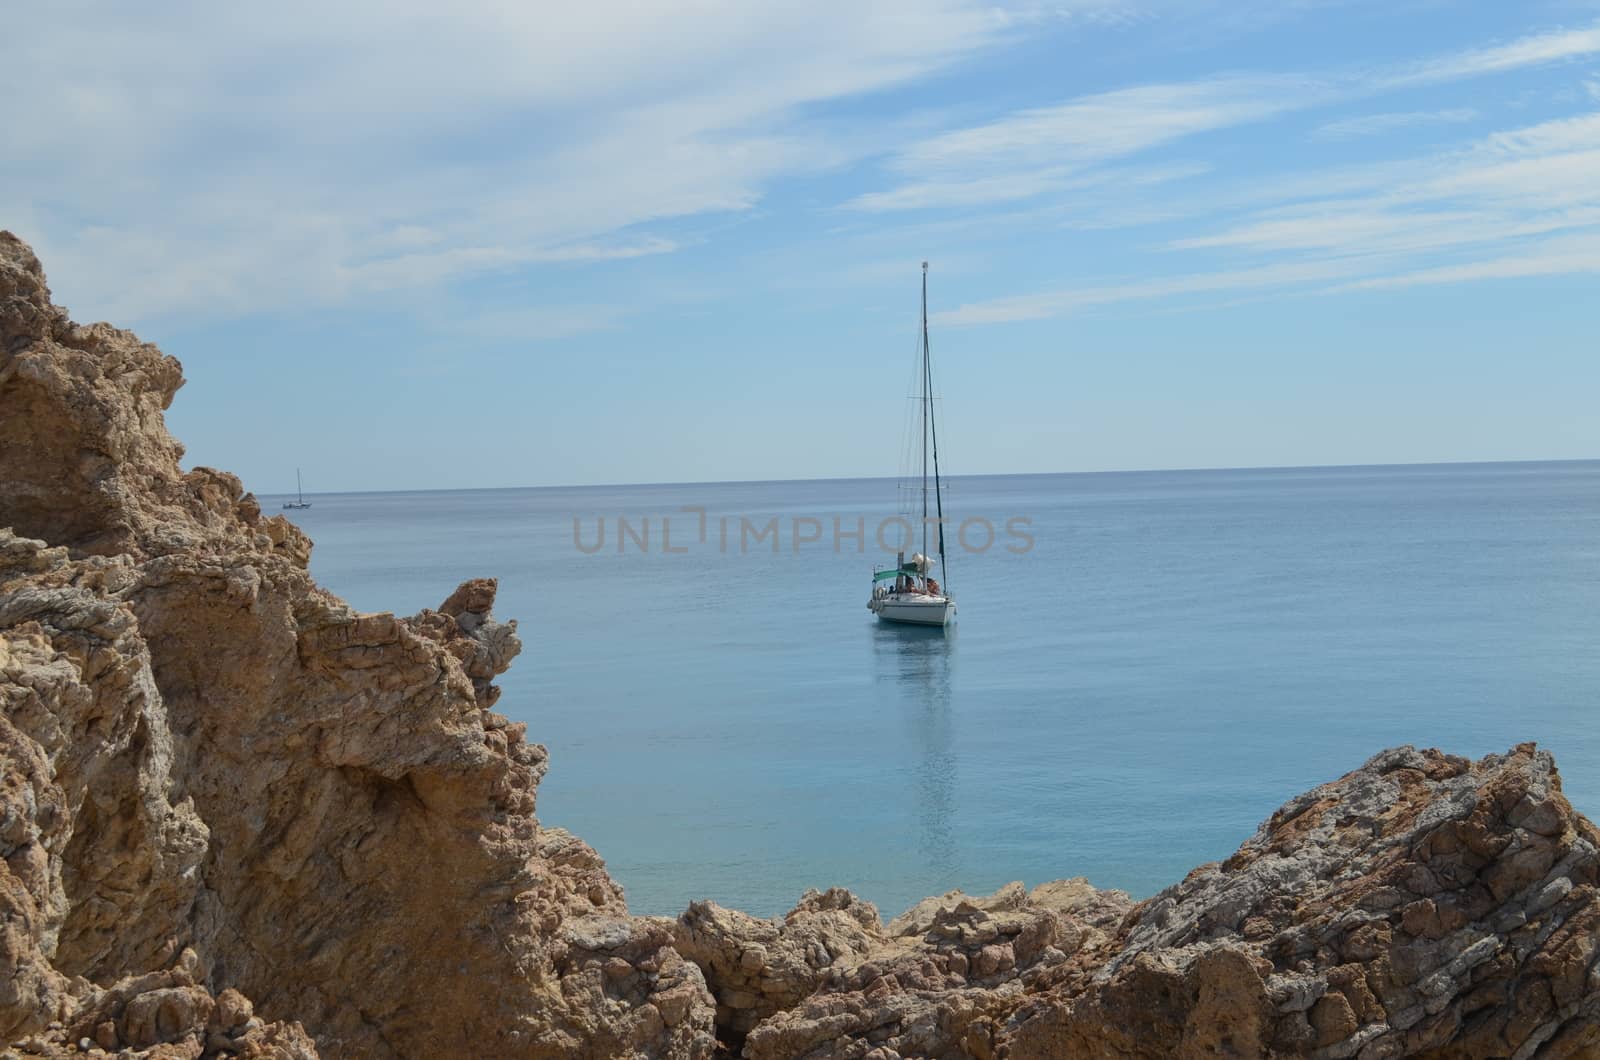 Sailboat in The Mediterranean Sea In Calm Water With a Rock in The Fore Ground